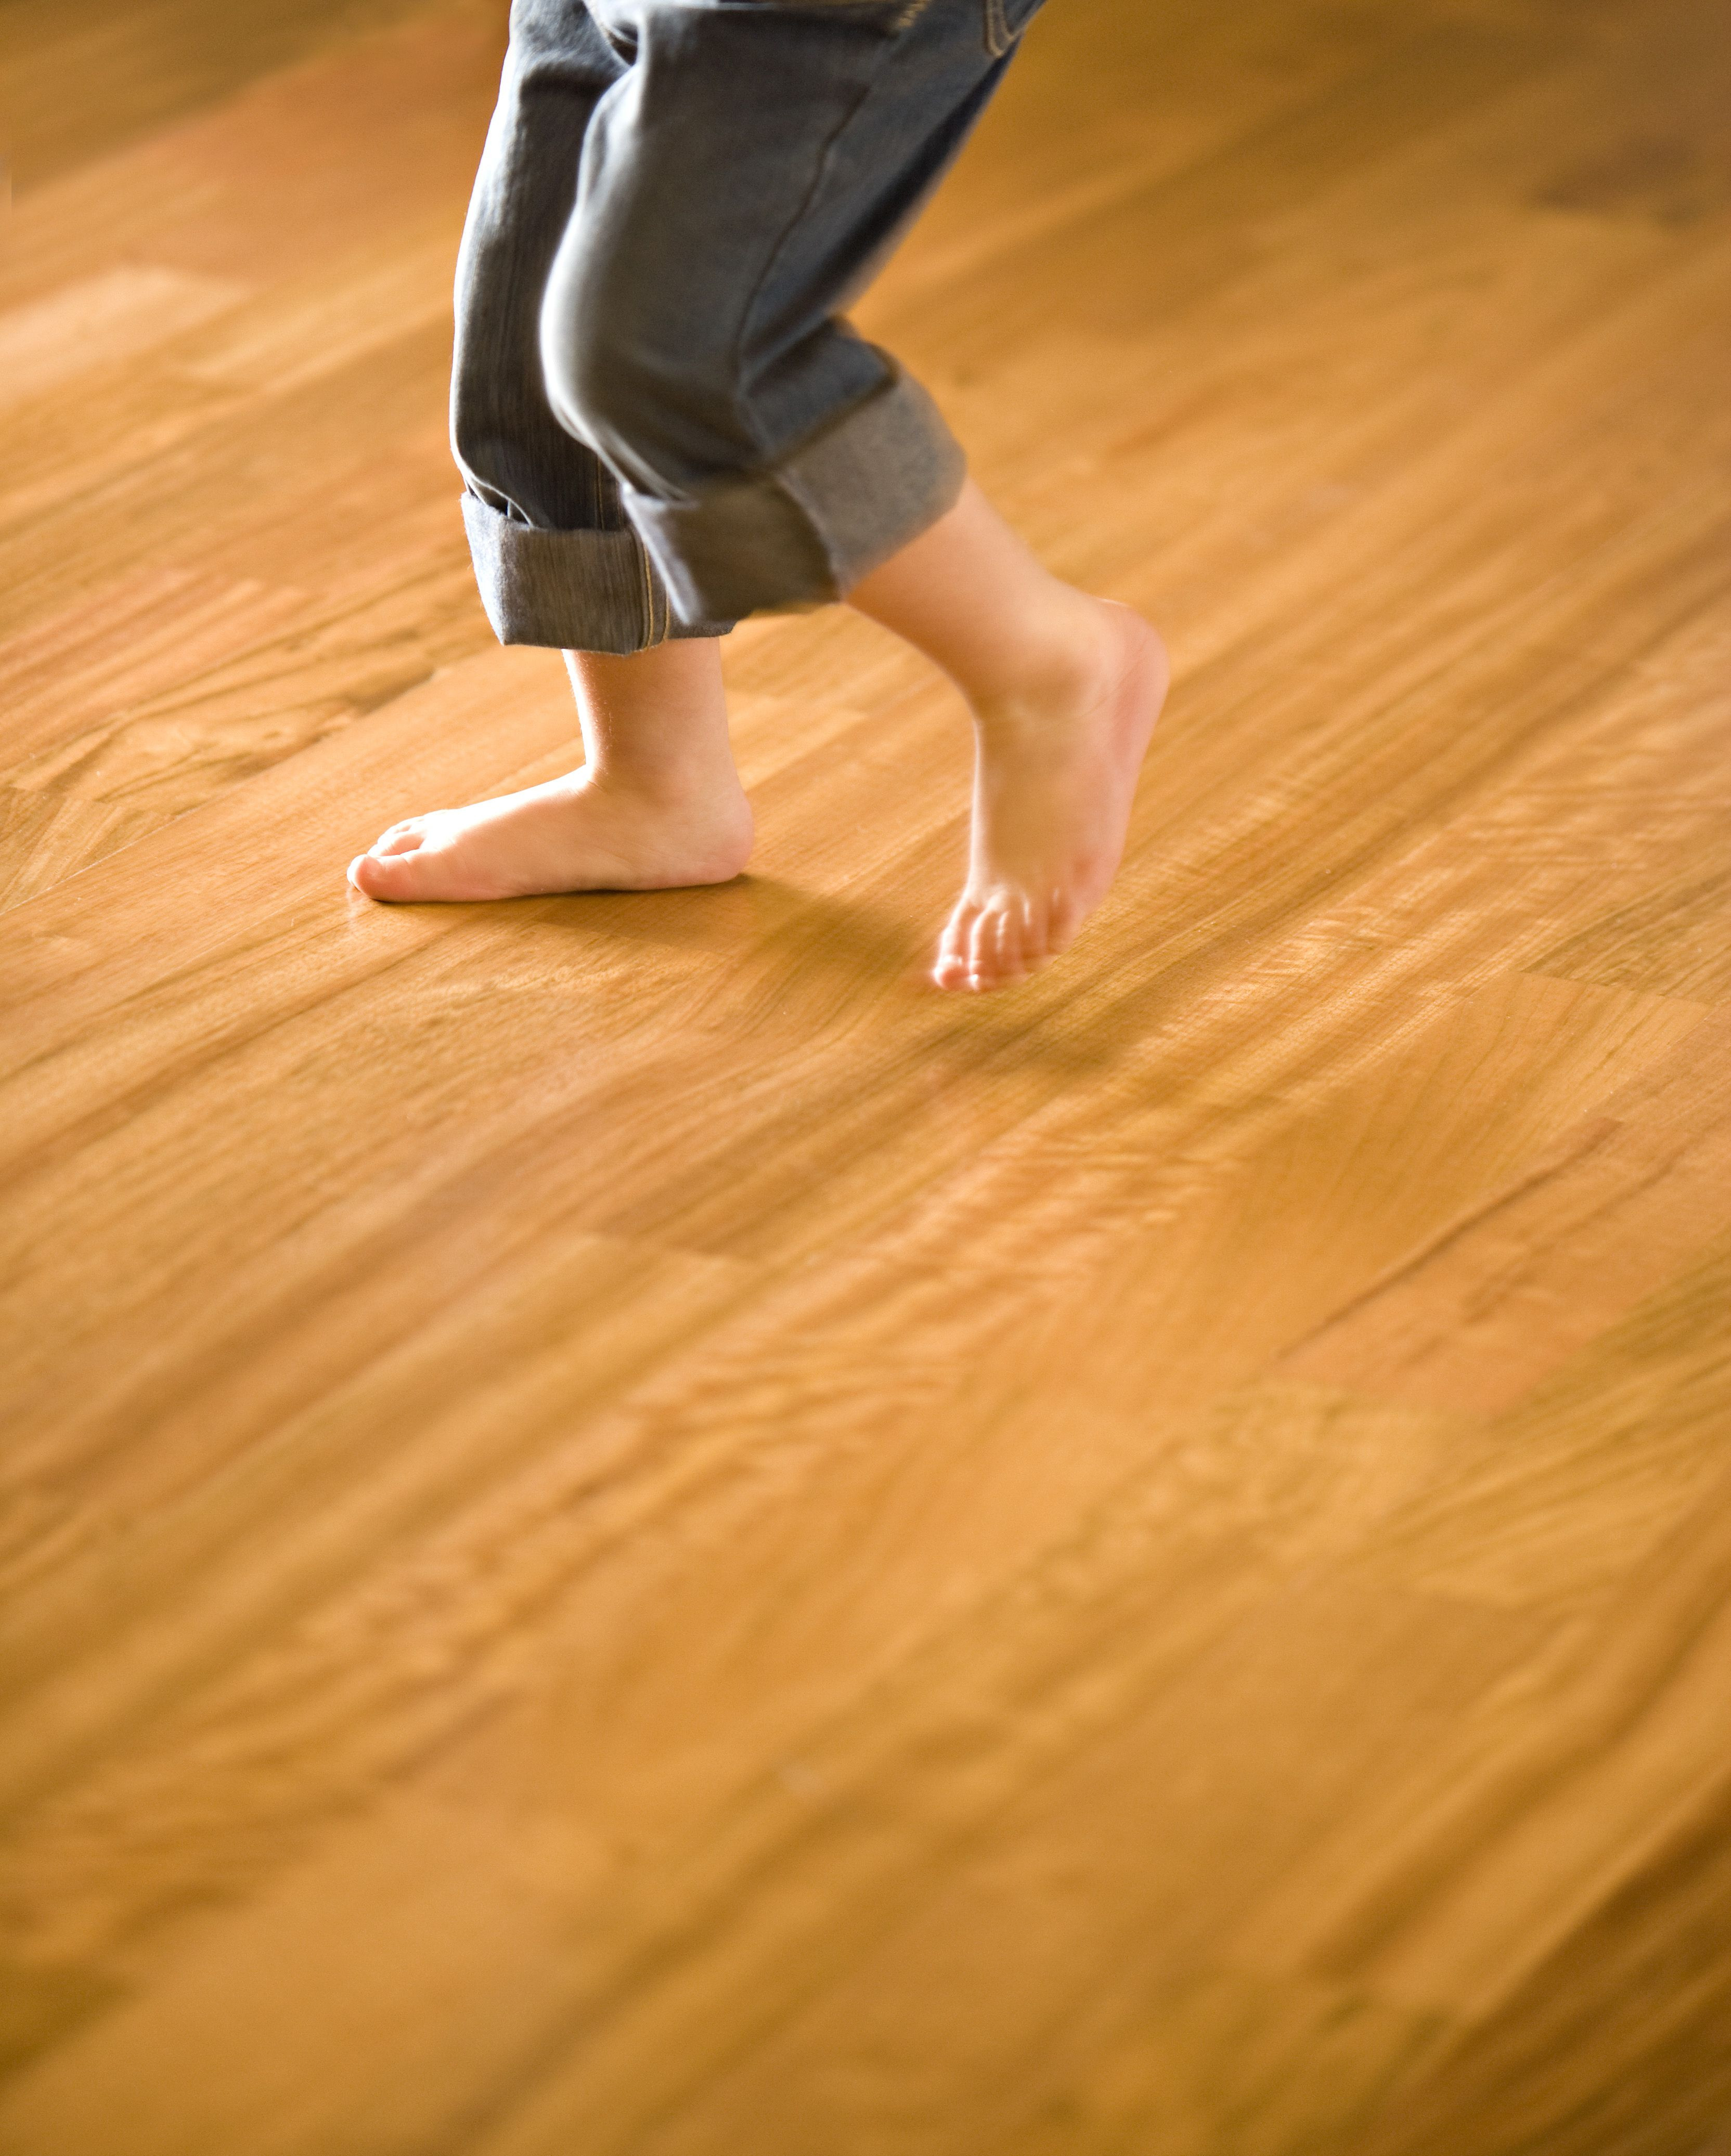 14 Awesome Best Product to Clean Hardwood Floors 2024 free download best product to clean hardwood floors of make sure your hardwood floors are clean for the tiny bare feet in in make sure your hardwood floors are clean for the tiny bare feet in your home